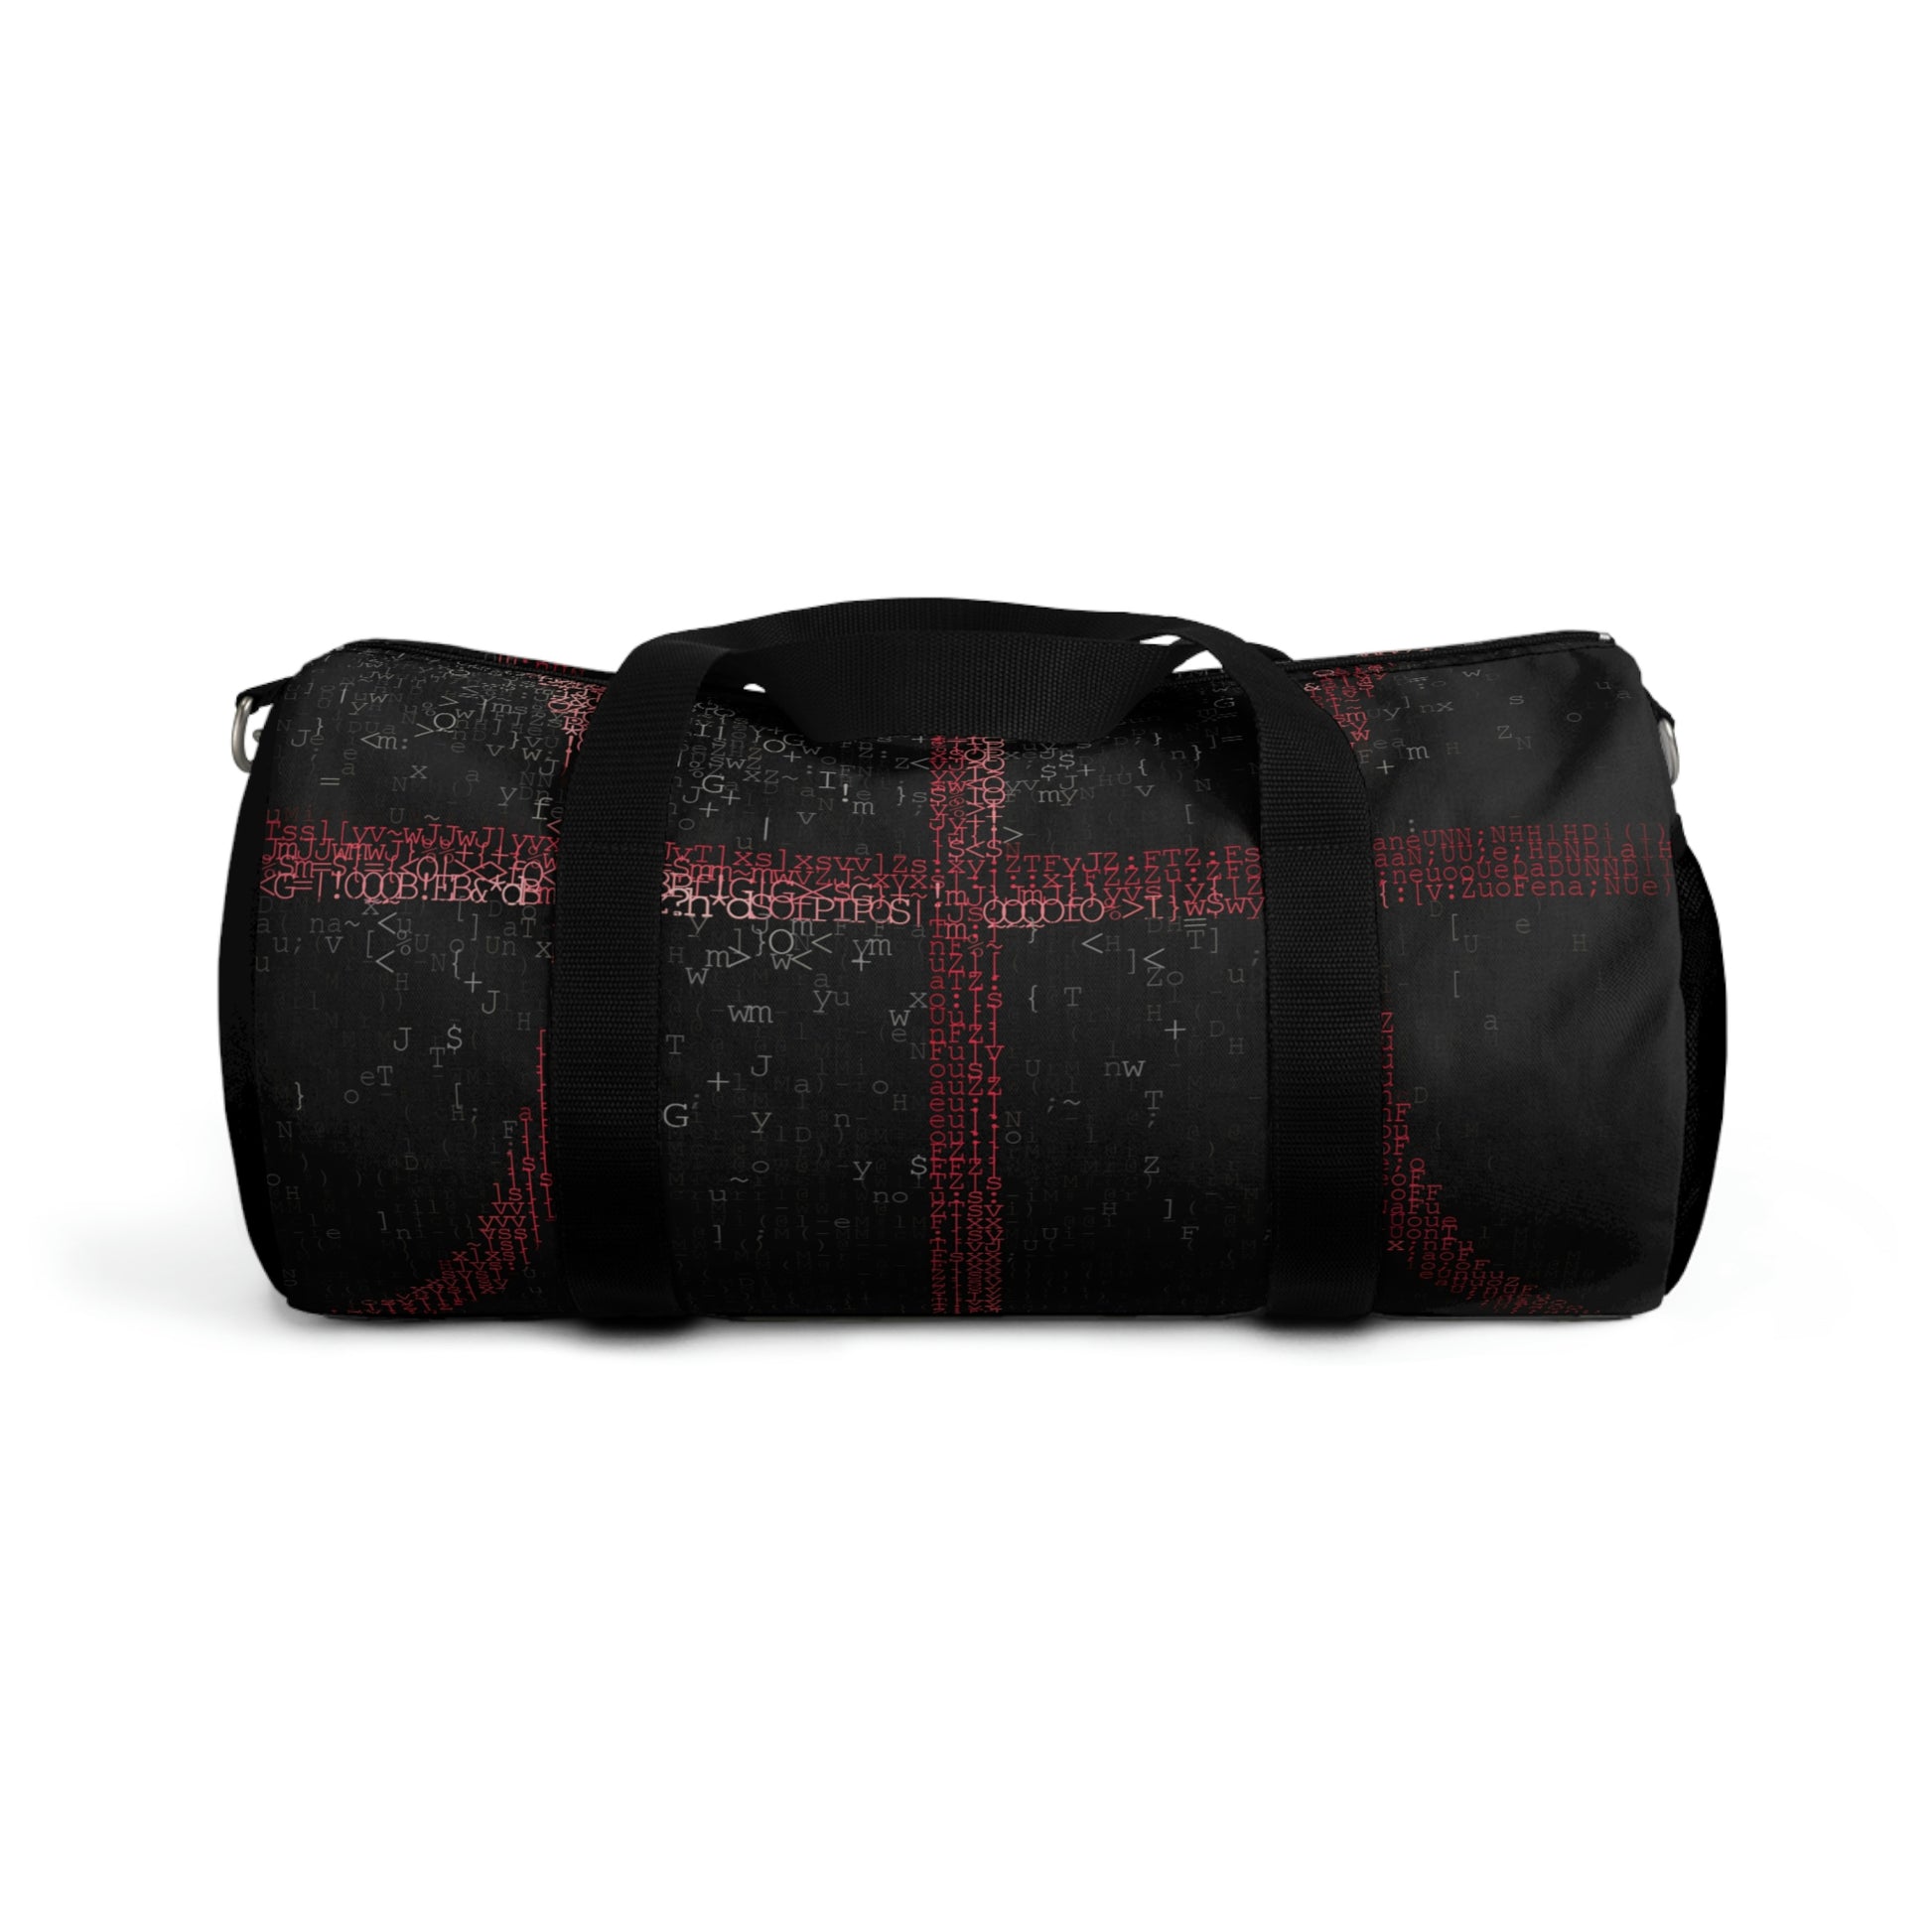 Black duffle bag with red lettering in the shape of basketball stitching. White letters scattered around the bag. Two hand straps and an adjustable arm strap. Net pocket on the side.